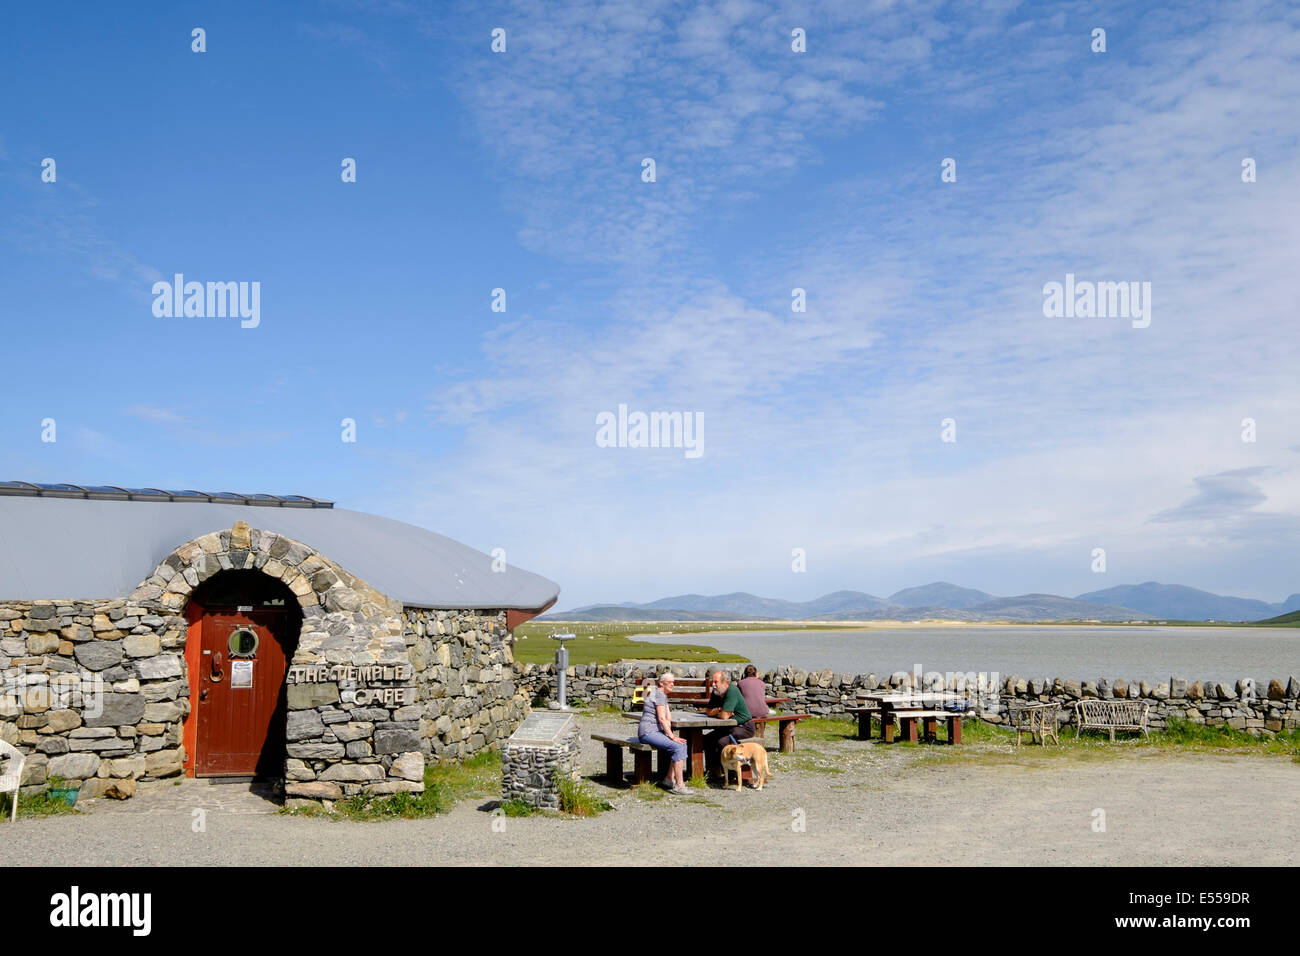 The Temple cafe with scenic view overlooking a small sea lock. Northton, Isle of Harris Outer Hebrides Western Isles Scotland UK Stock Photo